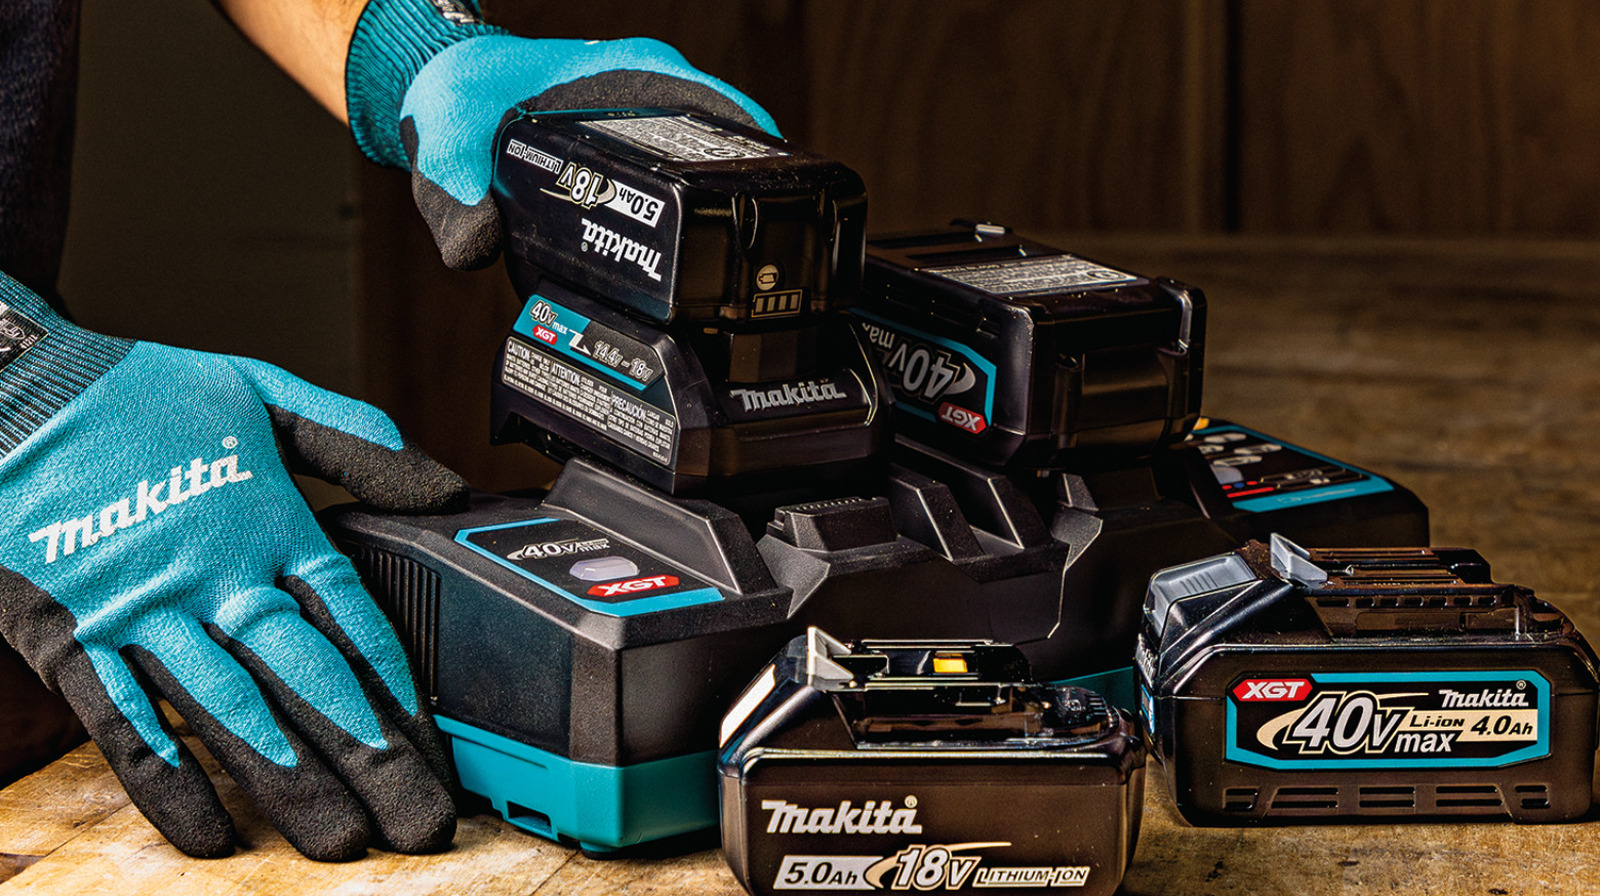 https://www.slashgear.com/img/gallery/5-most-useful-makita-products-that-arent-tools/l-intro-1703569910.jpg